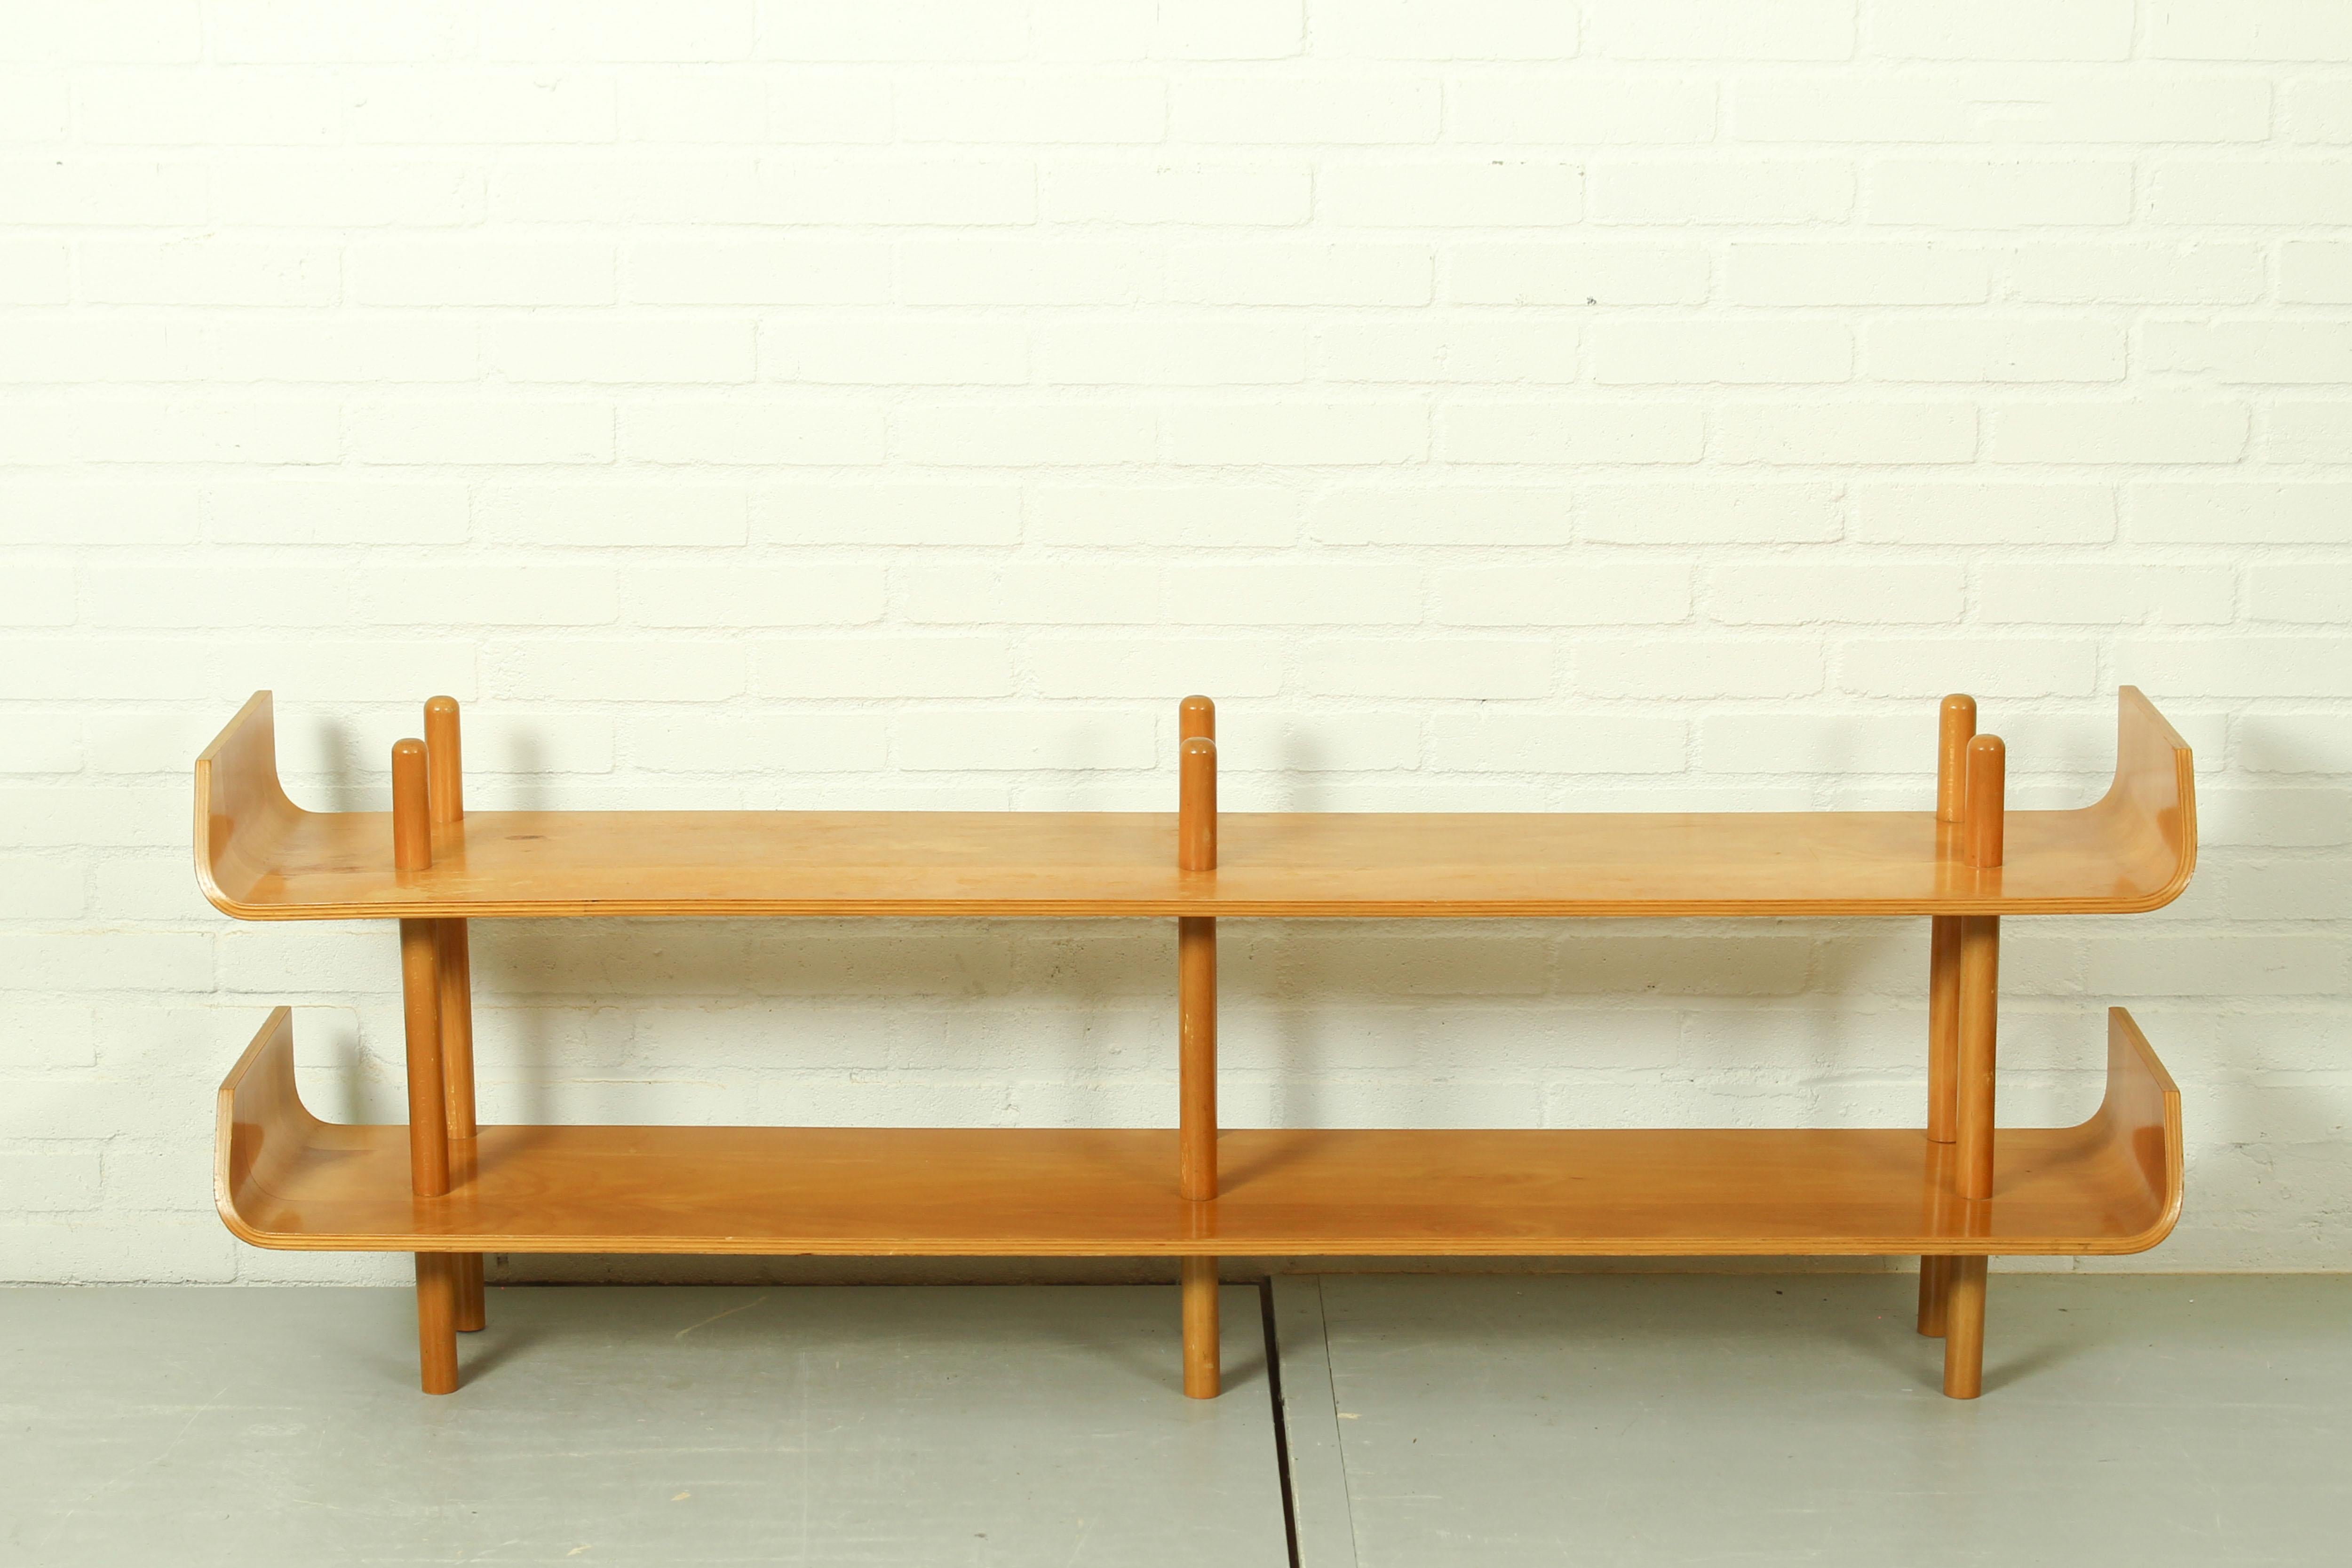 20th Century Wall unit by Willem Lutjens for Gouda den Boer, 1950s